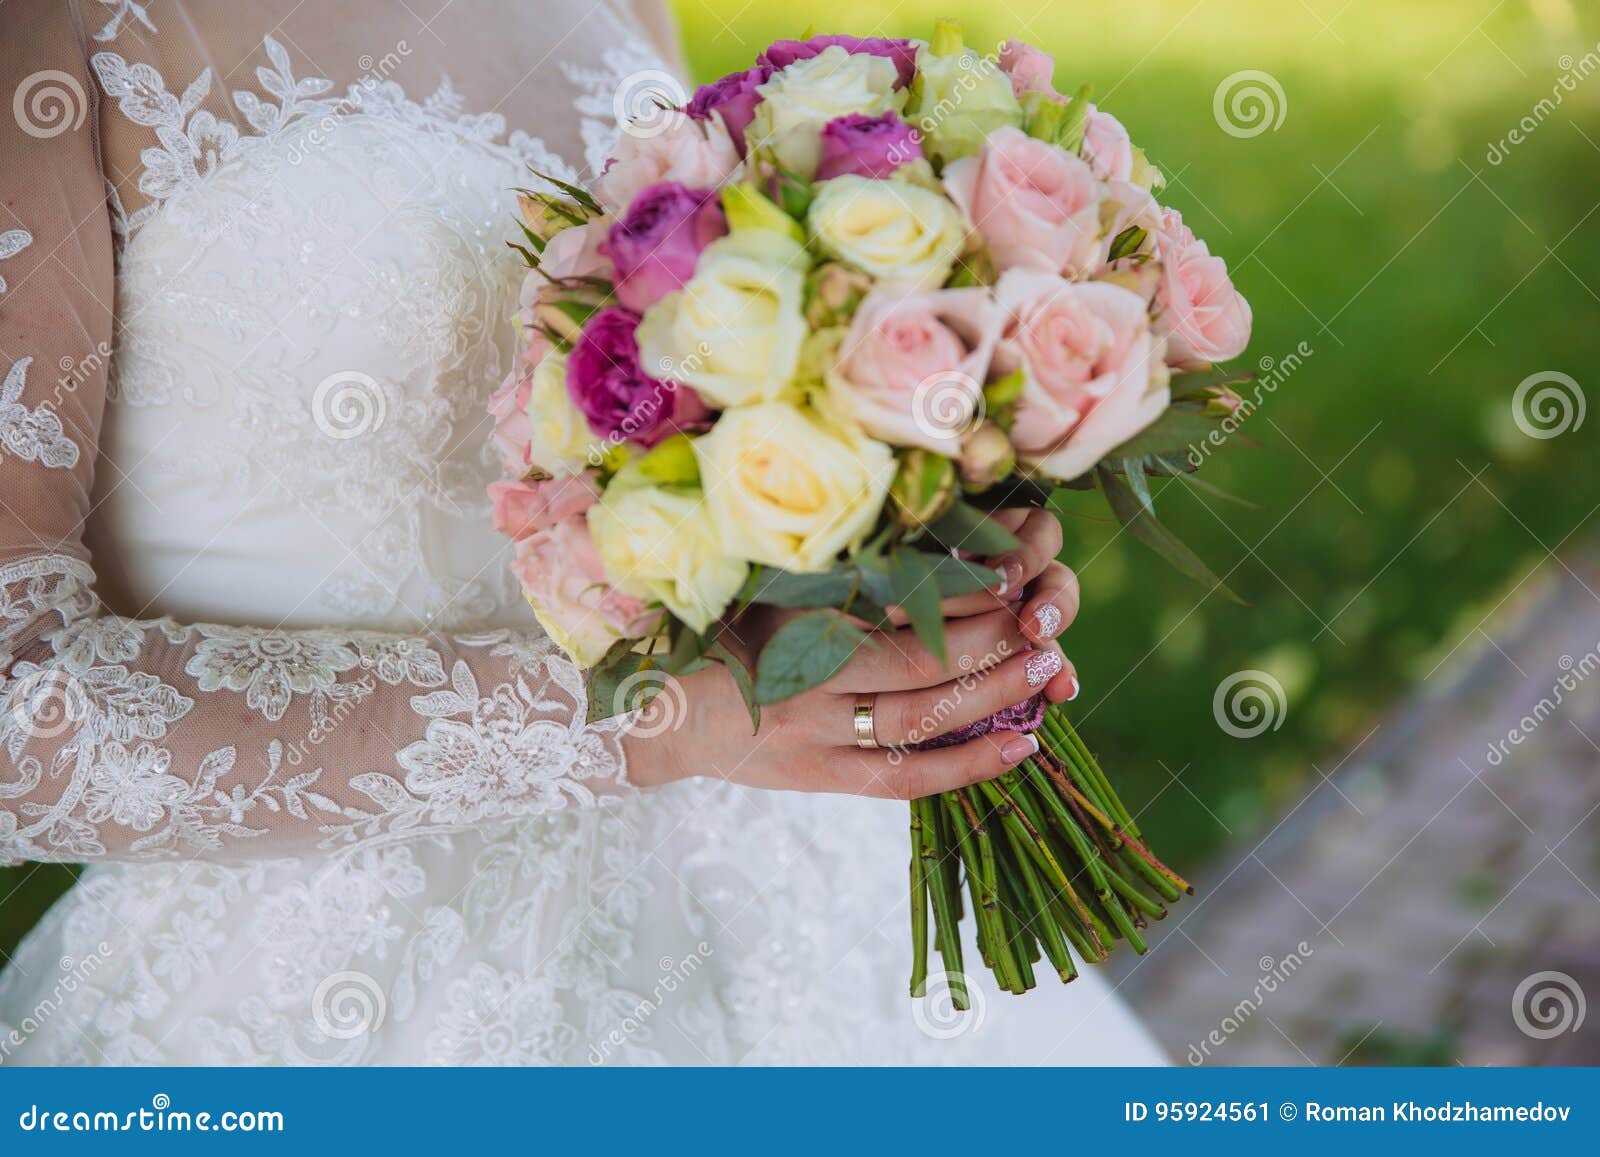 Closeup of Bride Hands Holding Beautiful Wedding Bouquet with White and ...